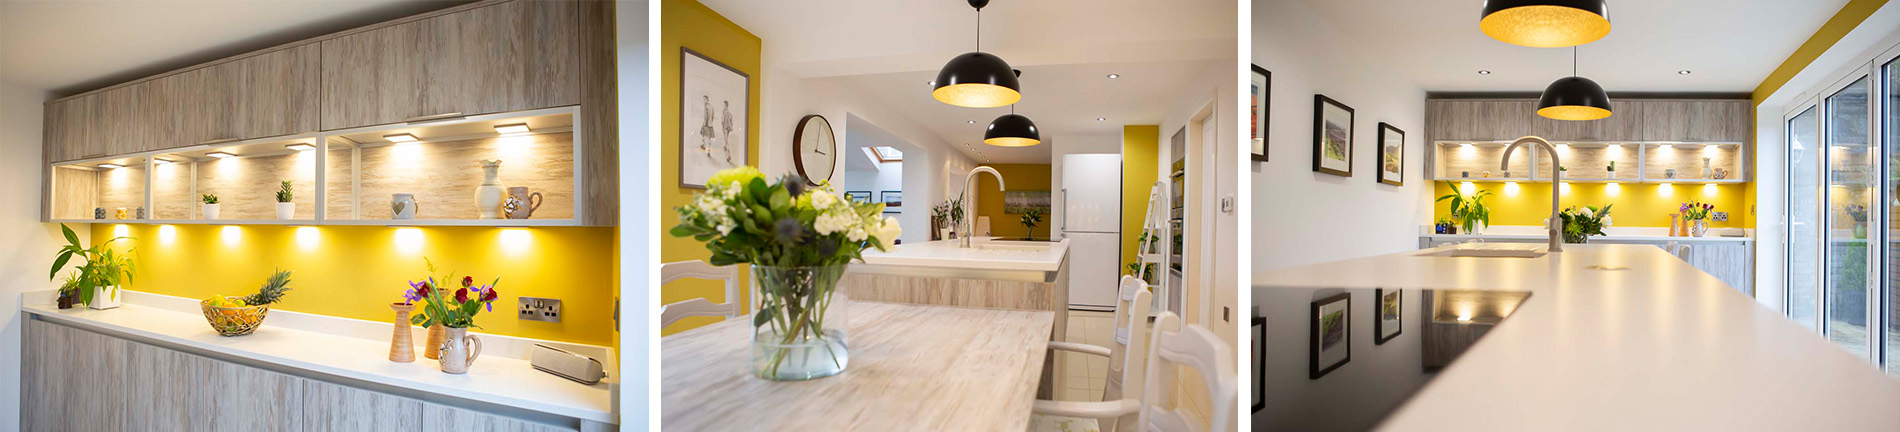 Crown Handleless kitchen with open shelving, kitchen island and mustard feature wall